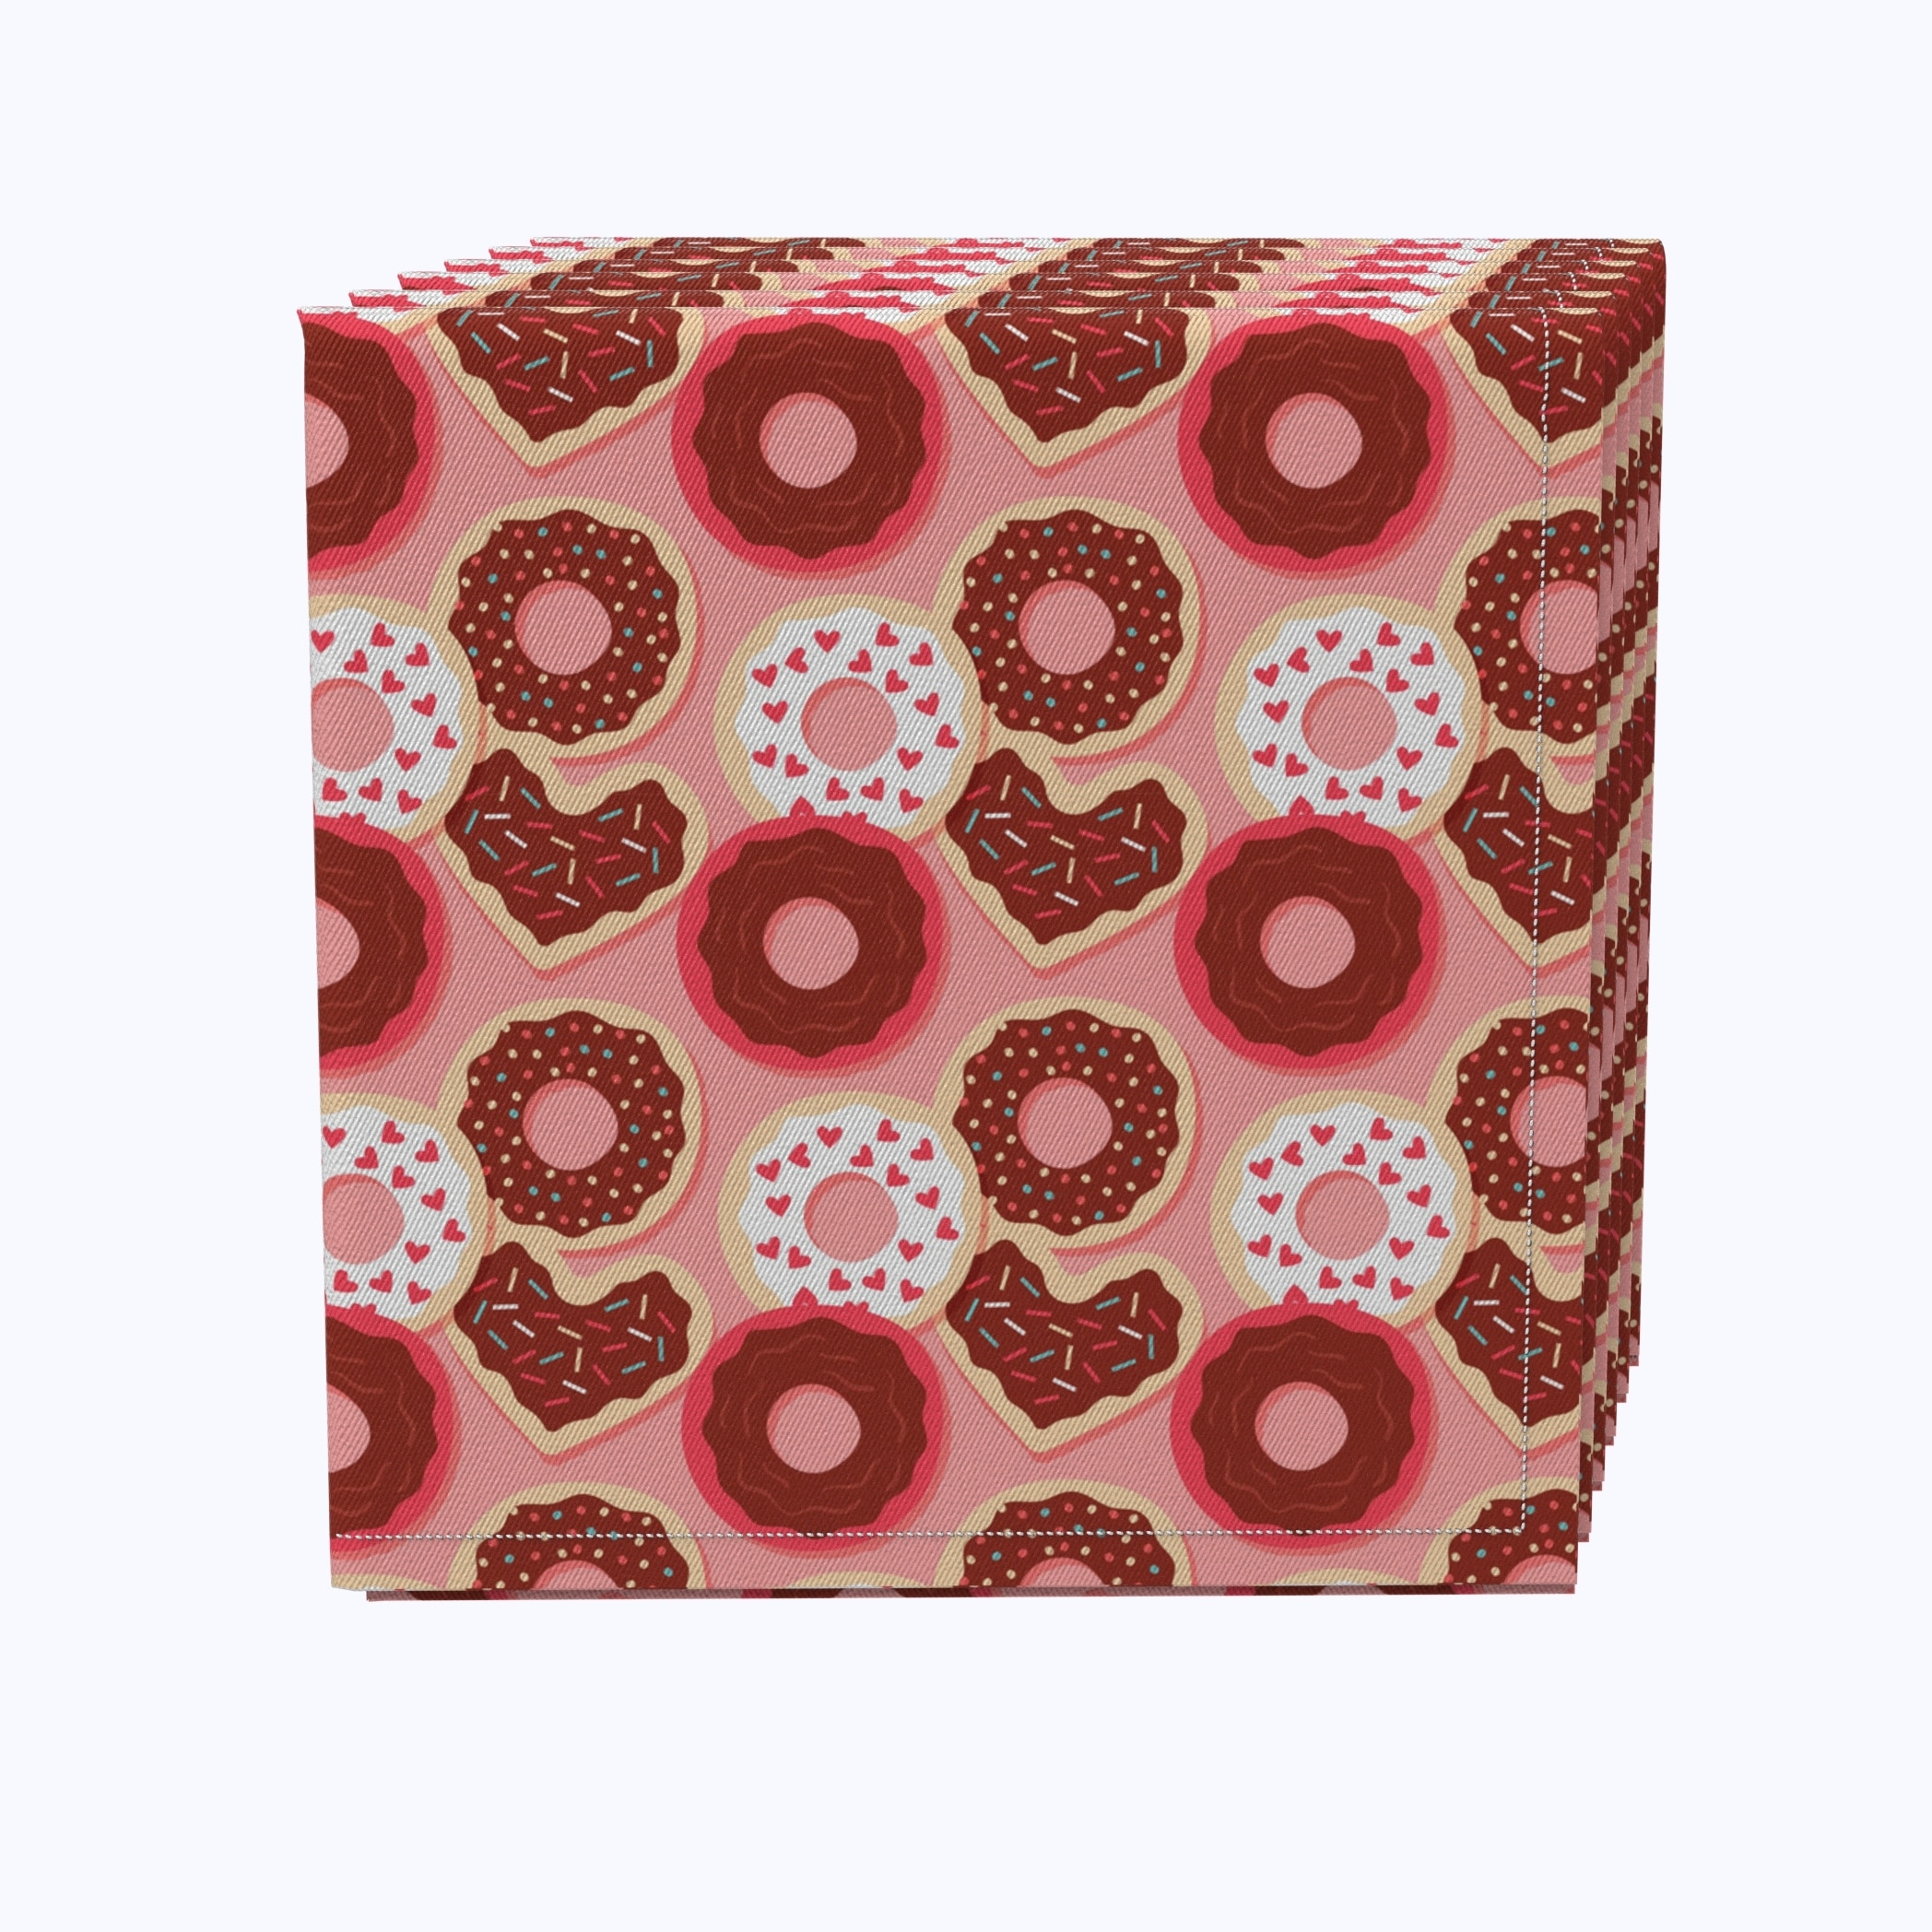 Fabric Textile Products, Inc. Napkin Set of 4, 100% Cotton, 20x20", Sweet Sweet Donuts - 20 x 20